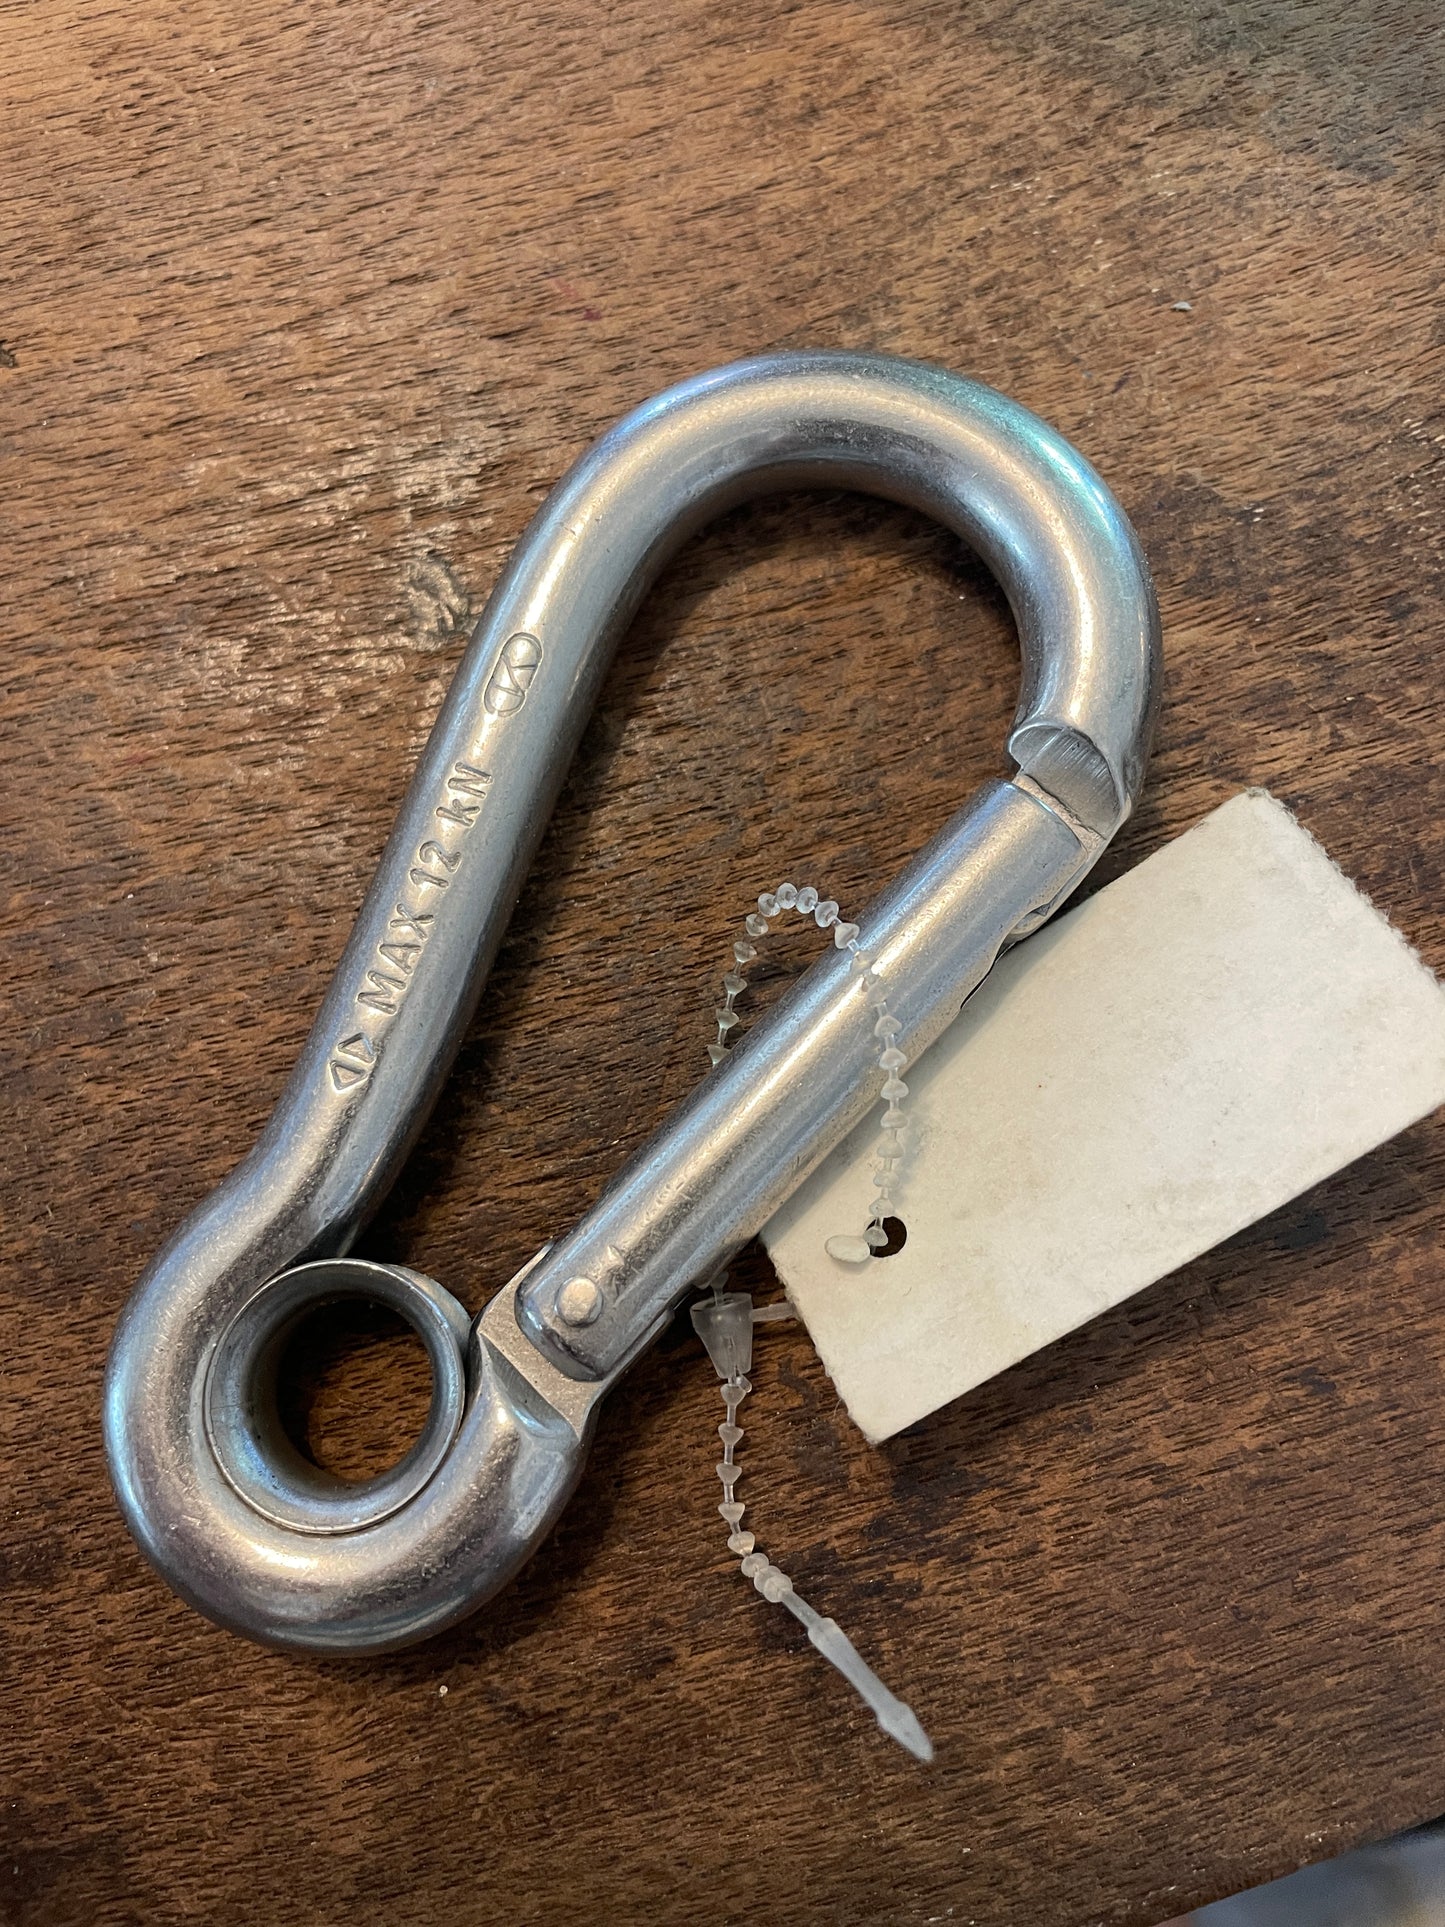 316 Stainless Steel Carabiner With 7/16” Eyelet- 4” Long